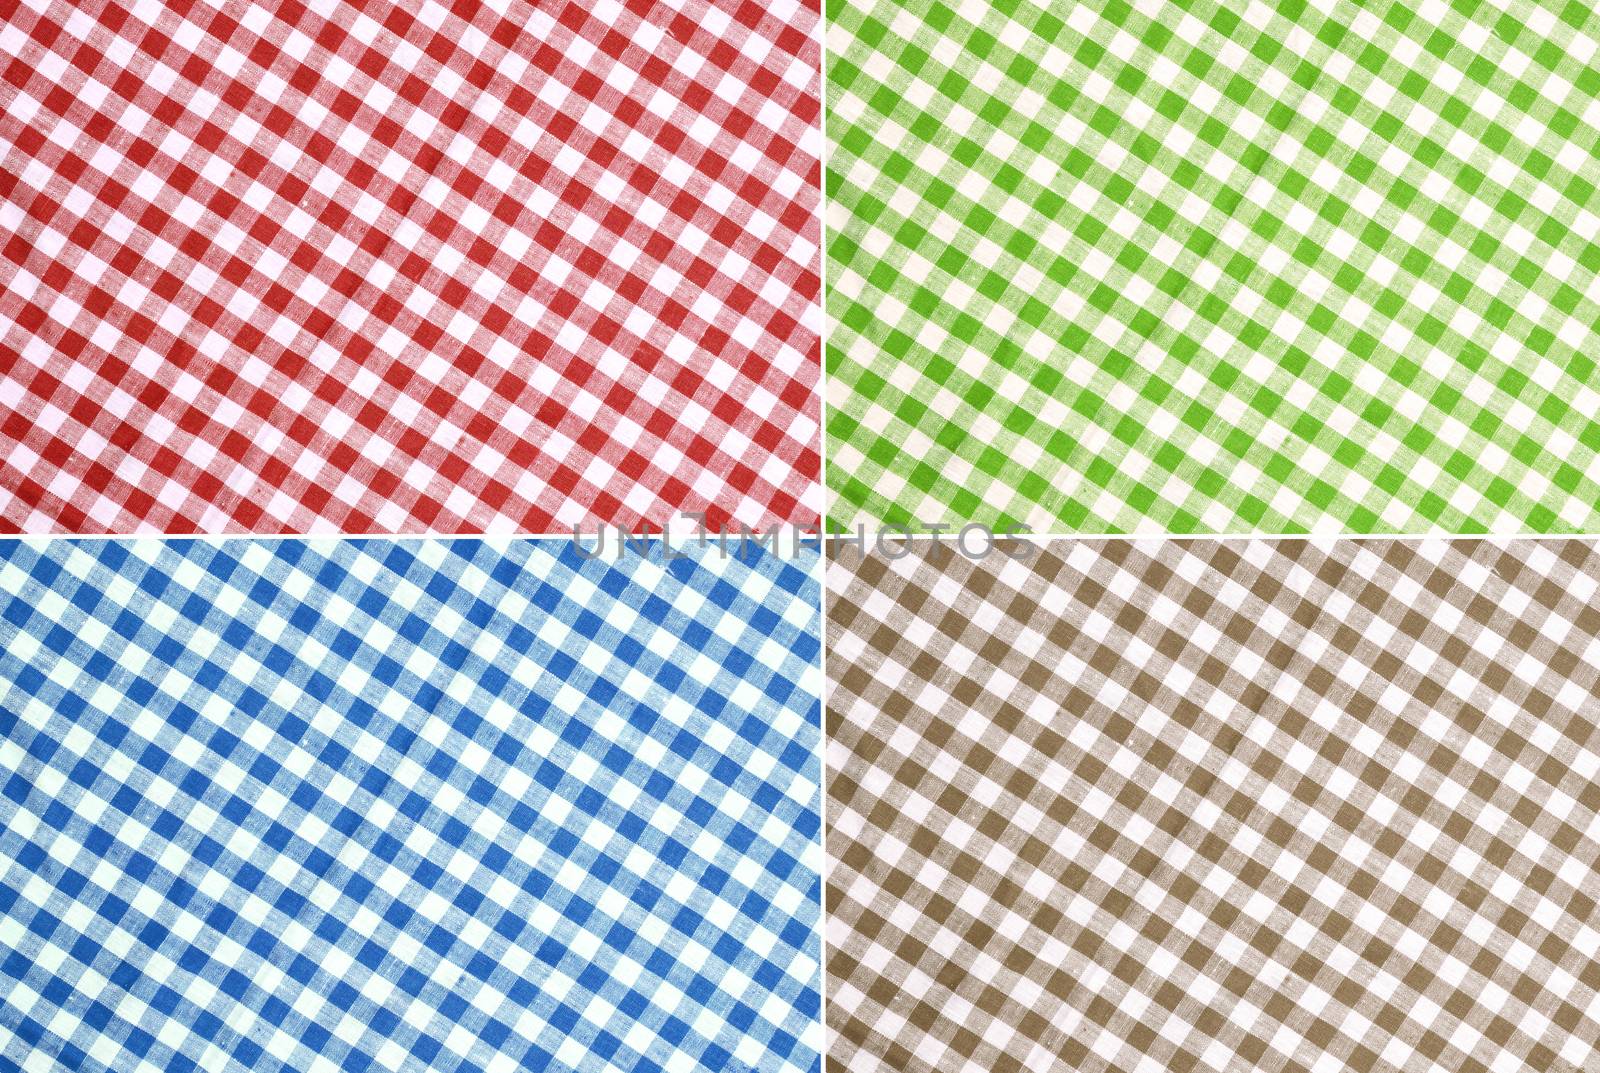 Checkered tablecloth backgrouns by xamtiw